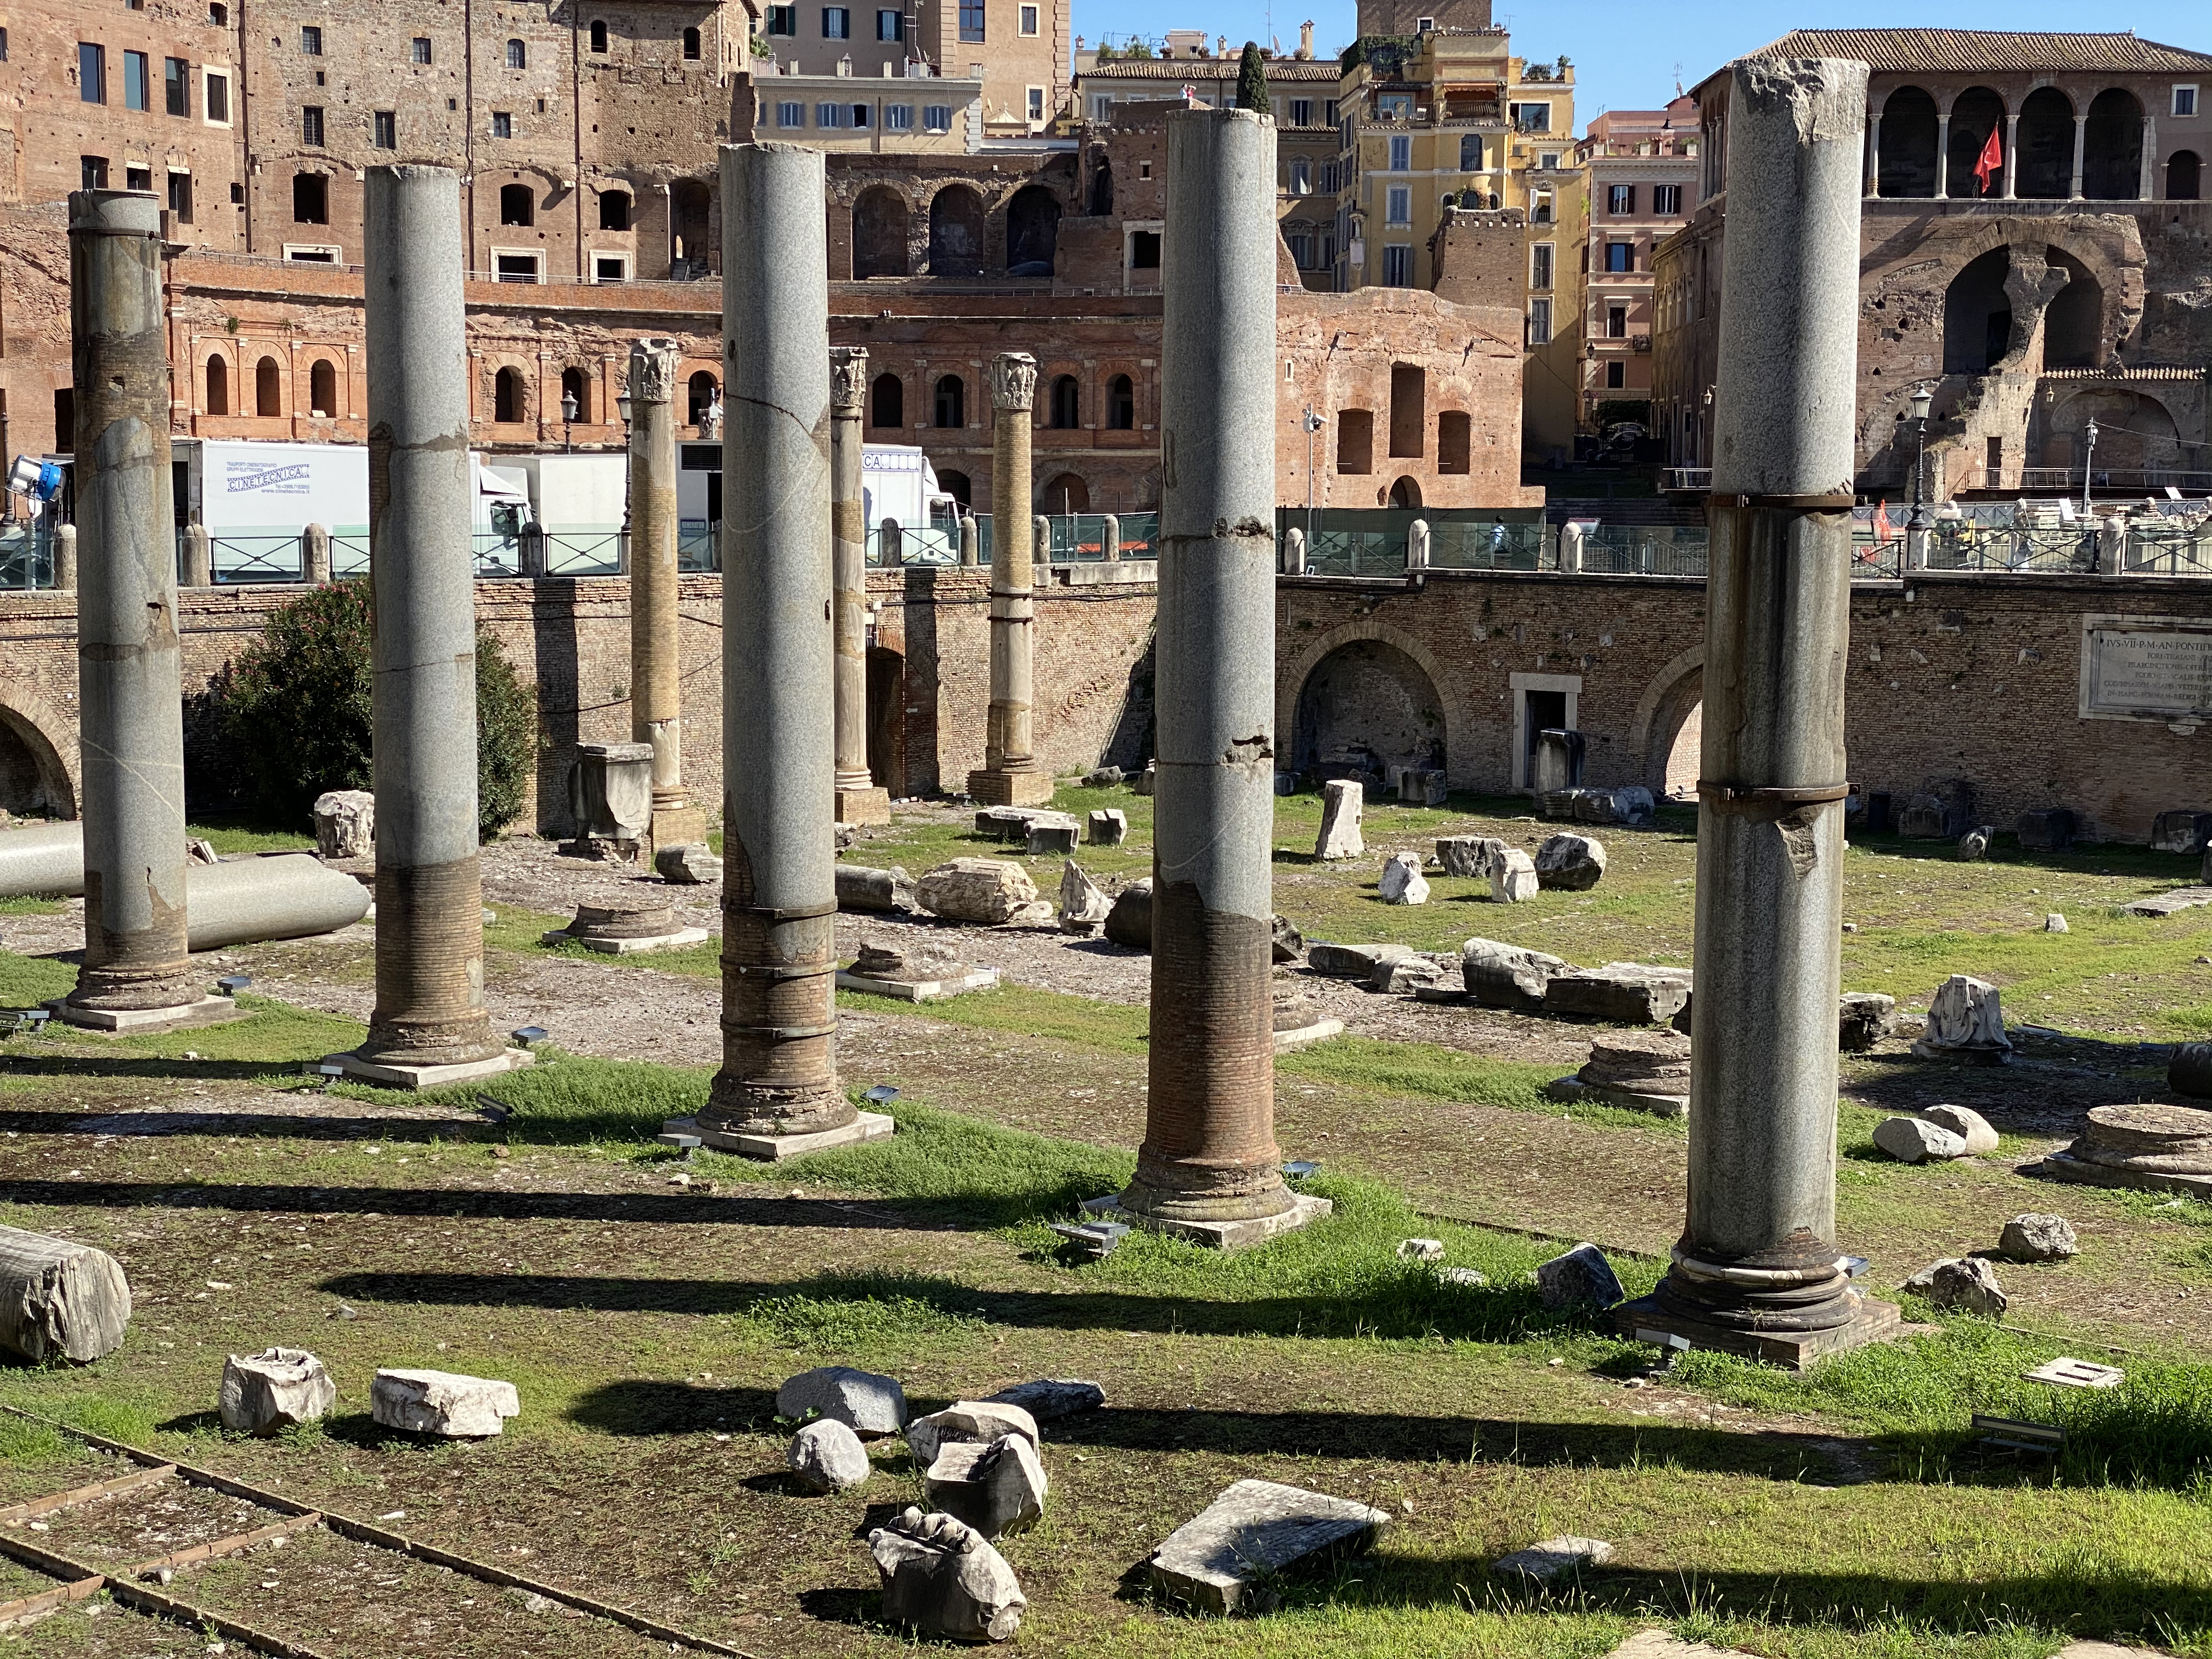 A different angle of Trajan's Forum, taken with the telephoto camera.